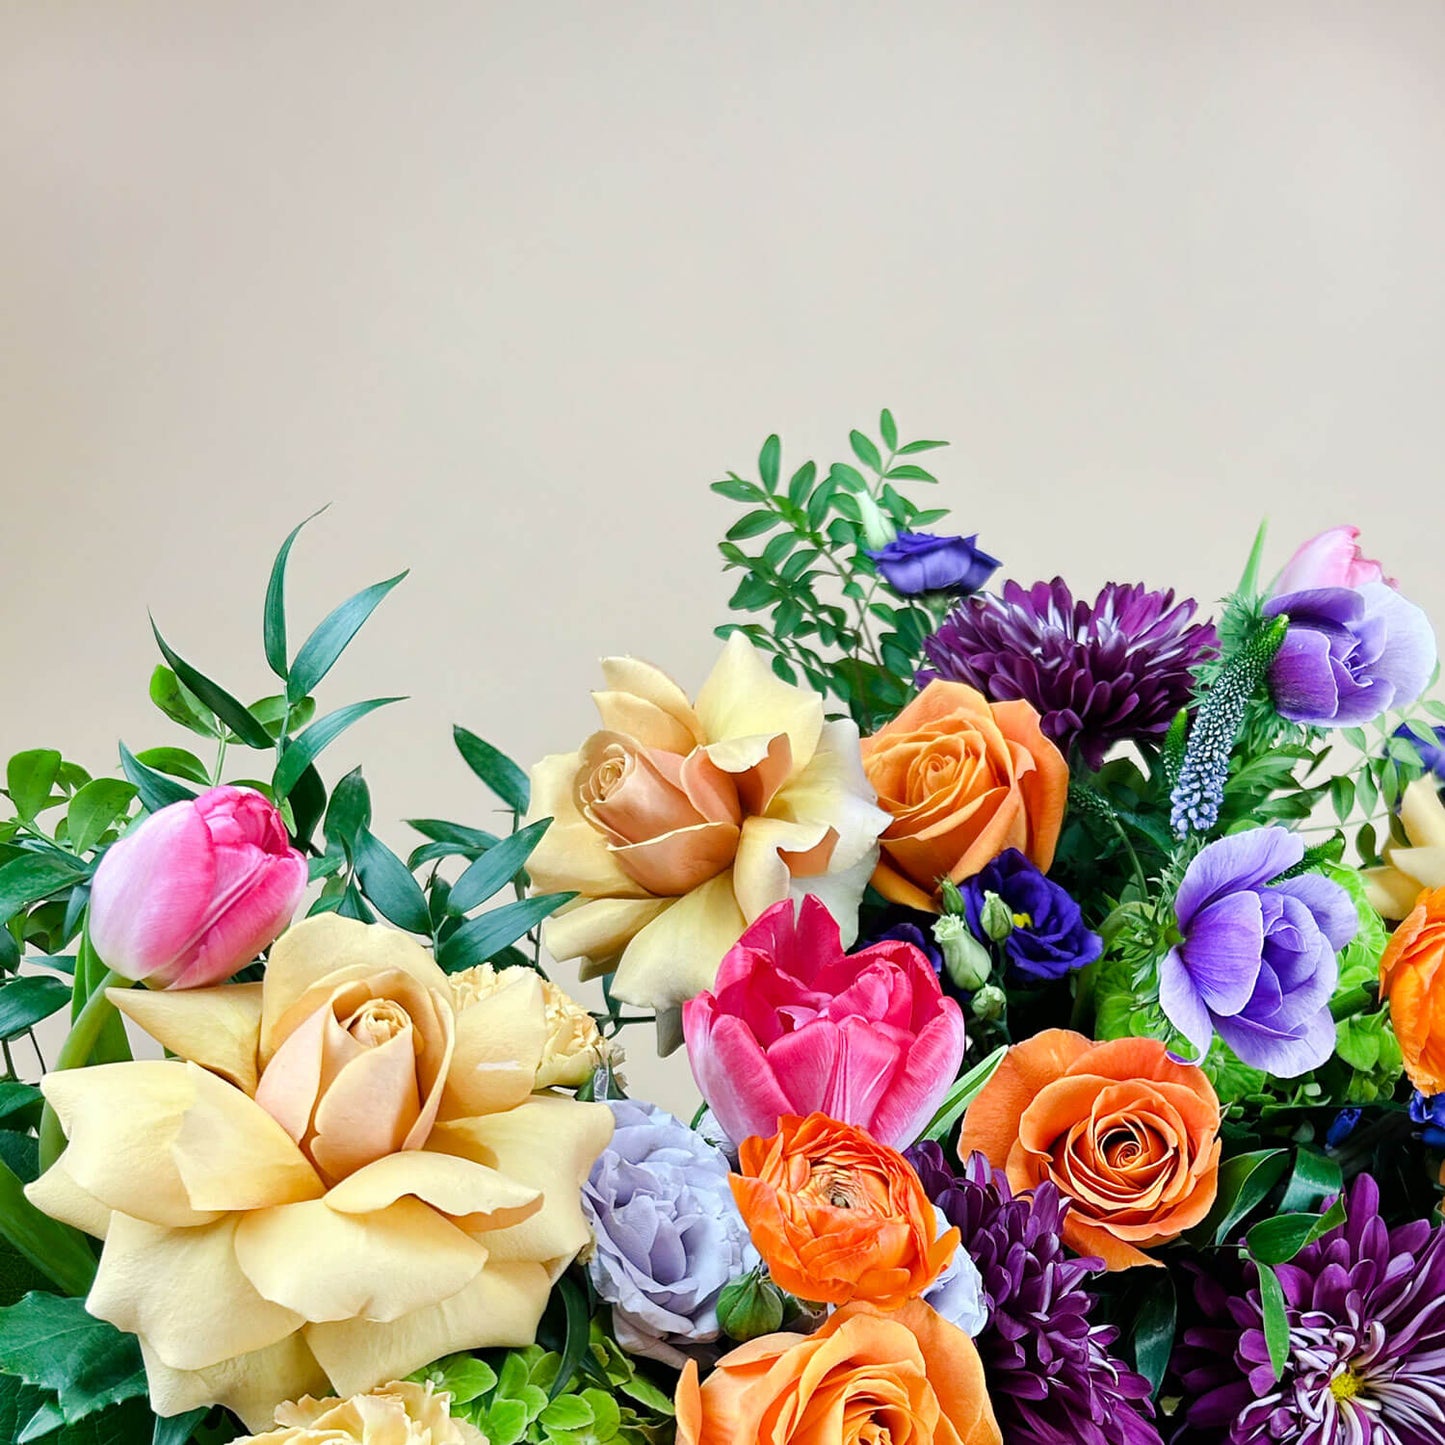 Close-up image of a dynamic bouquet featuring yellow and lavender hues transitioning into deeper purple tones, with accents of citrus orange for vibrancy. A thoughtful and romantic combination. Order online for same-day flower delivery from Toronto's best florist, available near you.